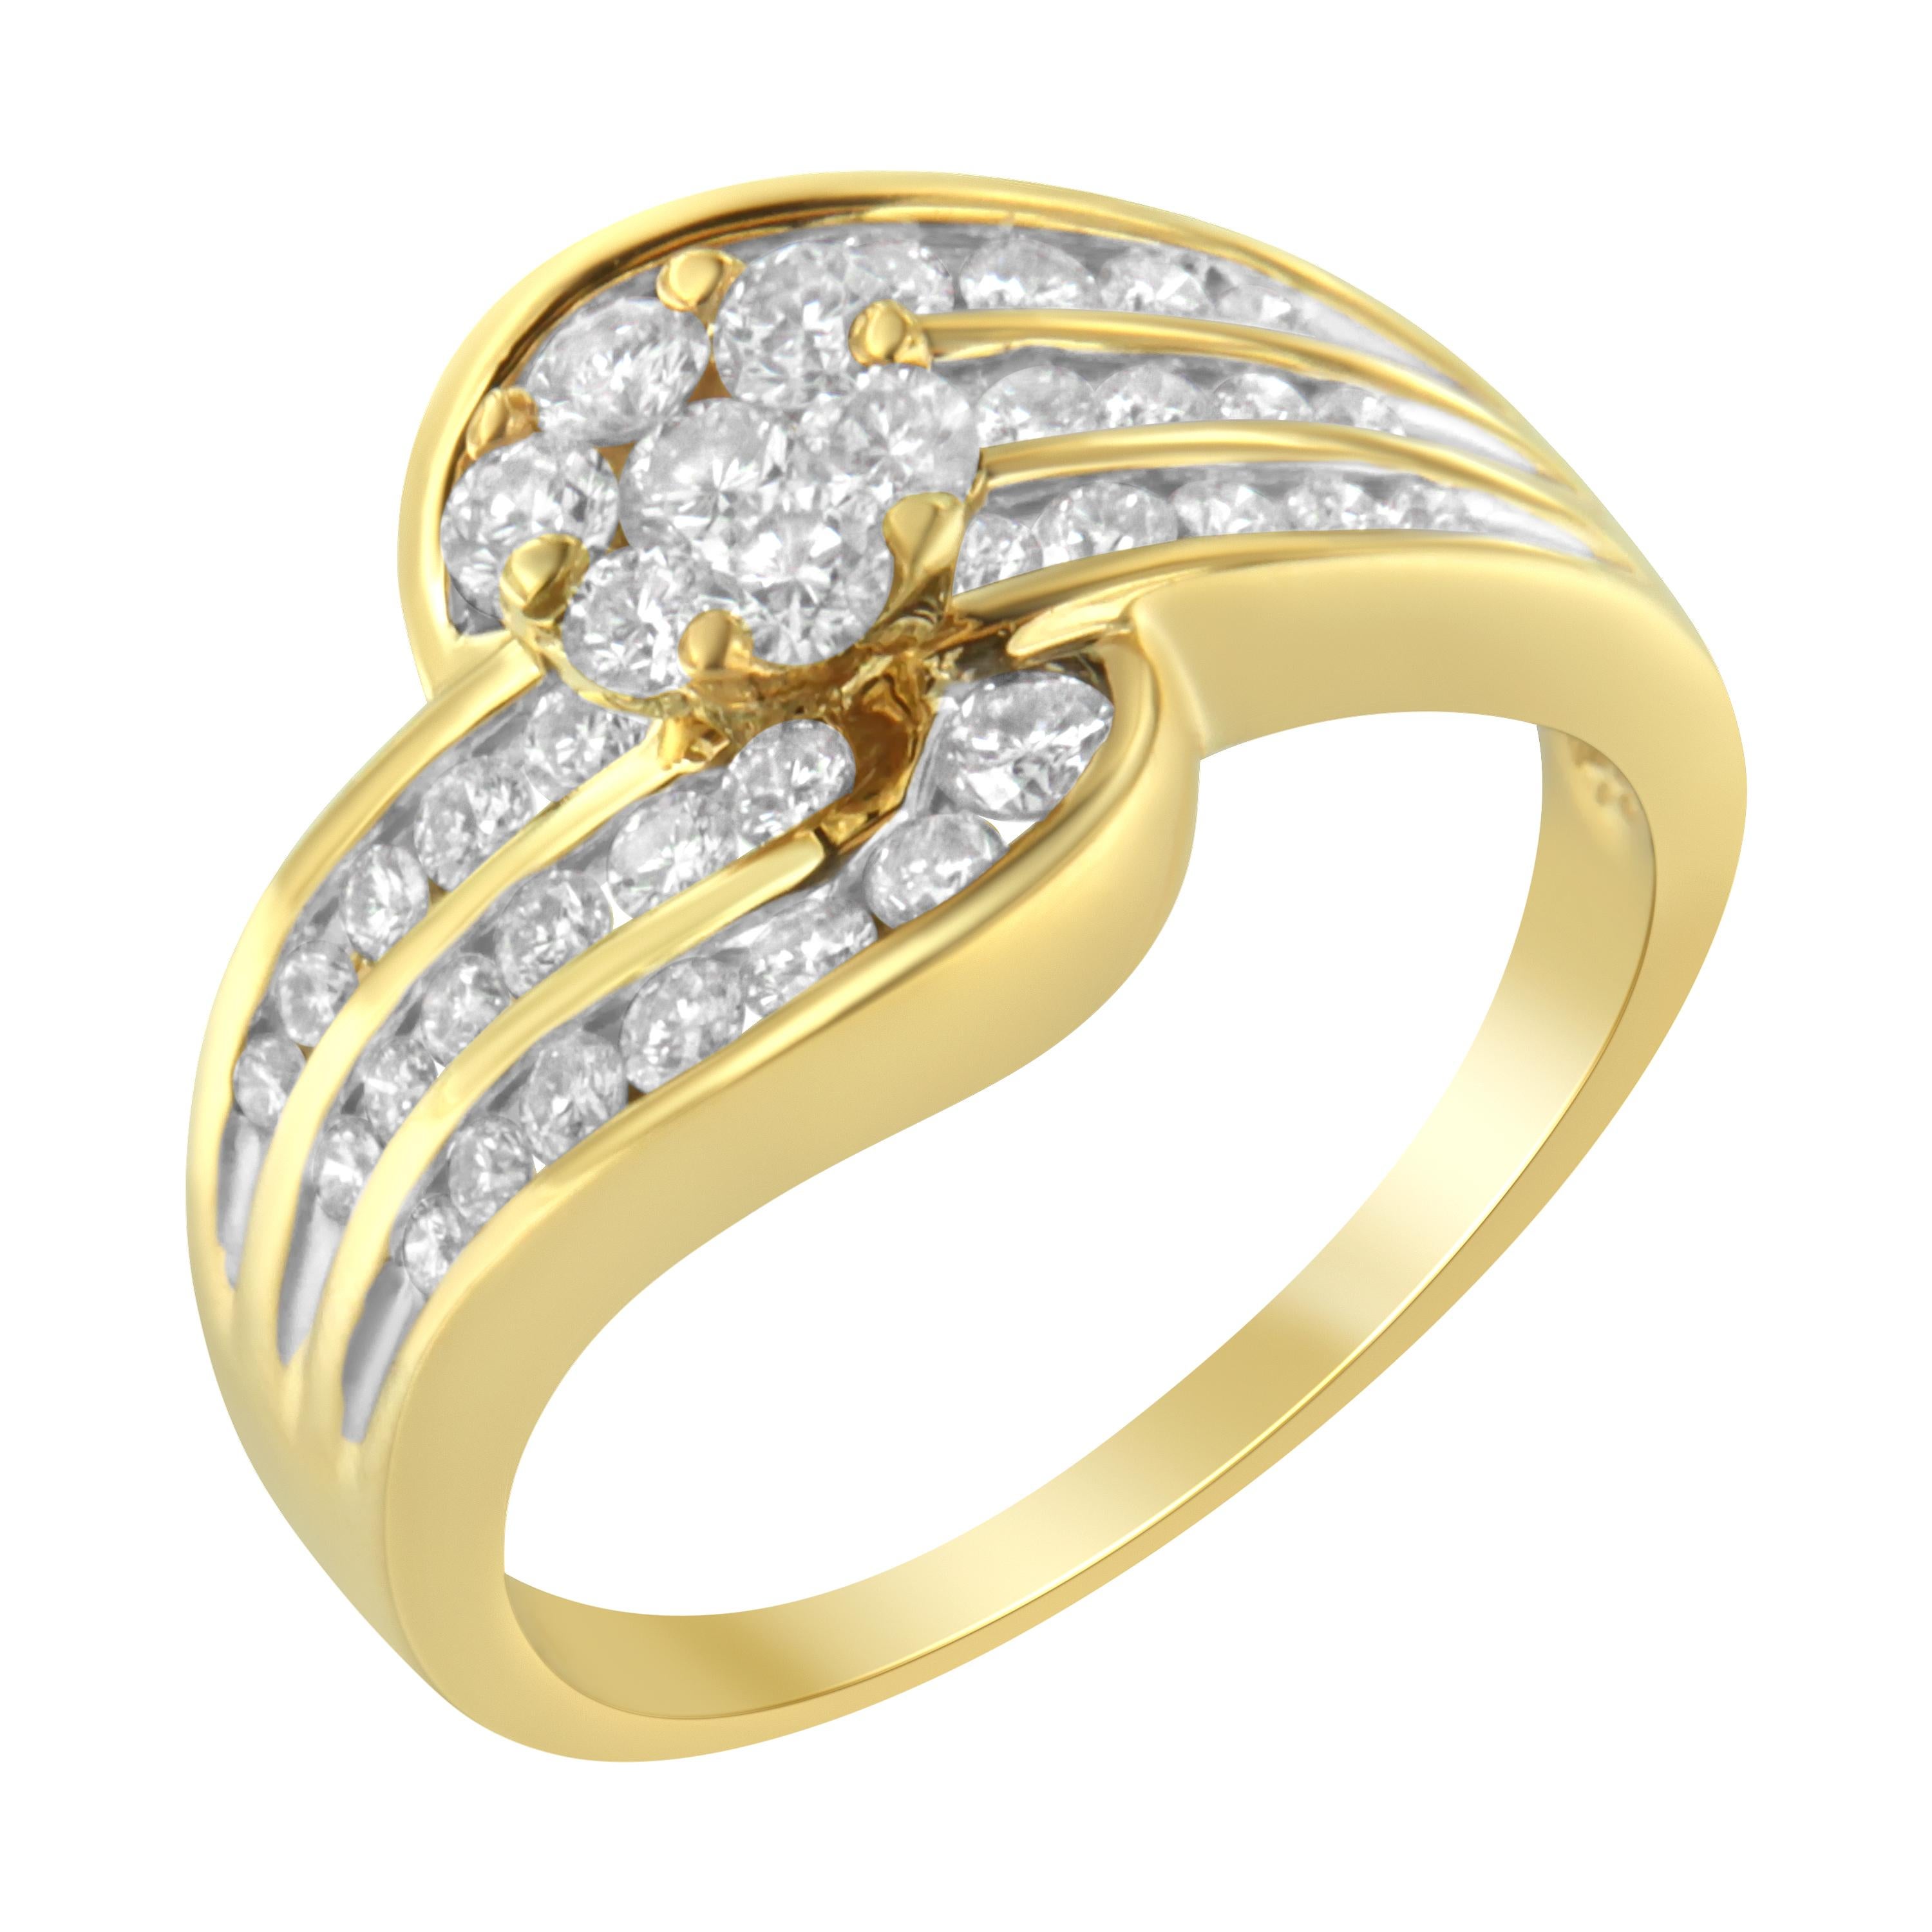 For Sale:  14K Yellow Gold 1 1/2 Carat Diamond Cocktail Bypass Ring 2